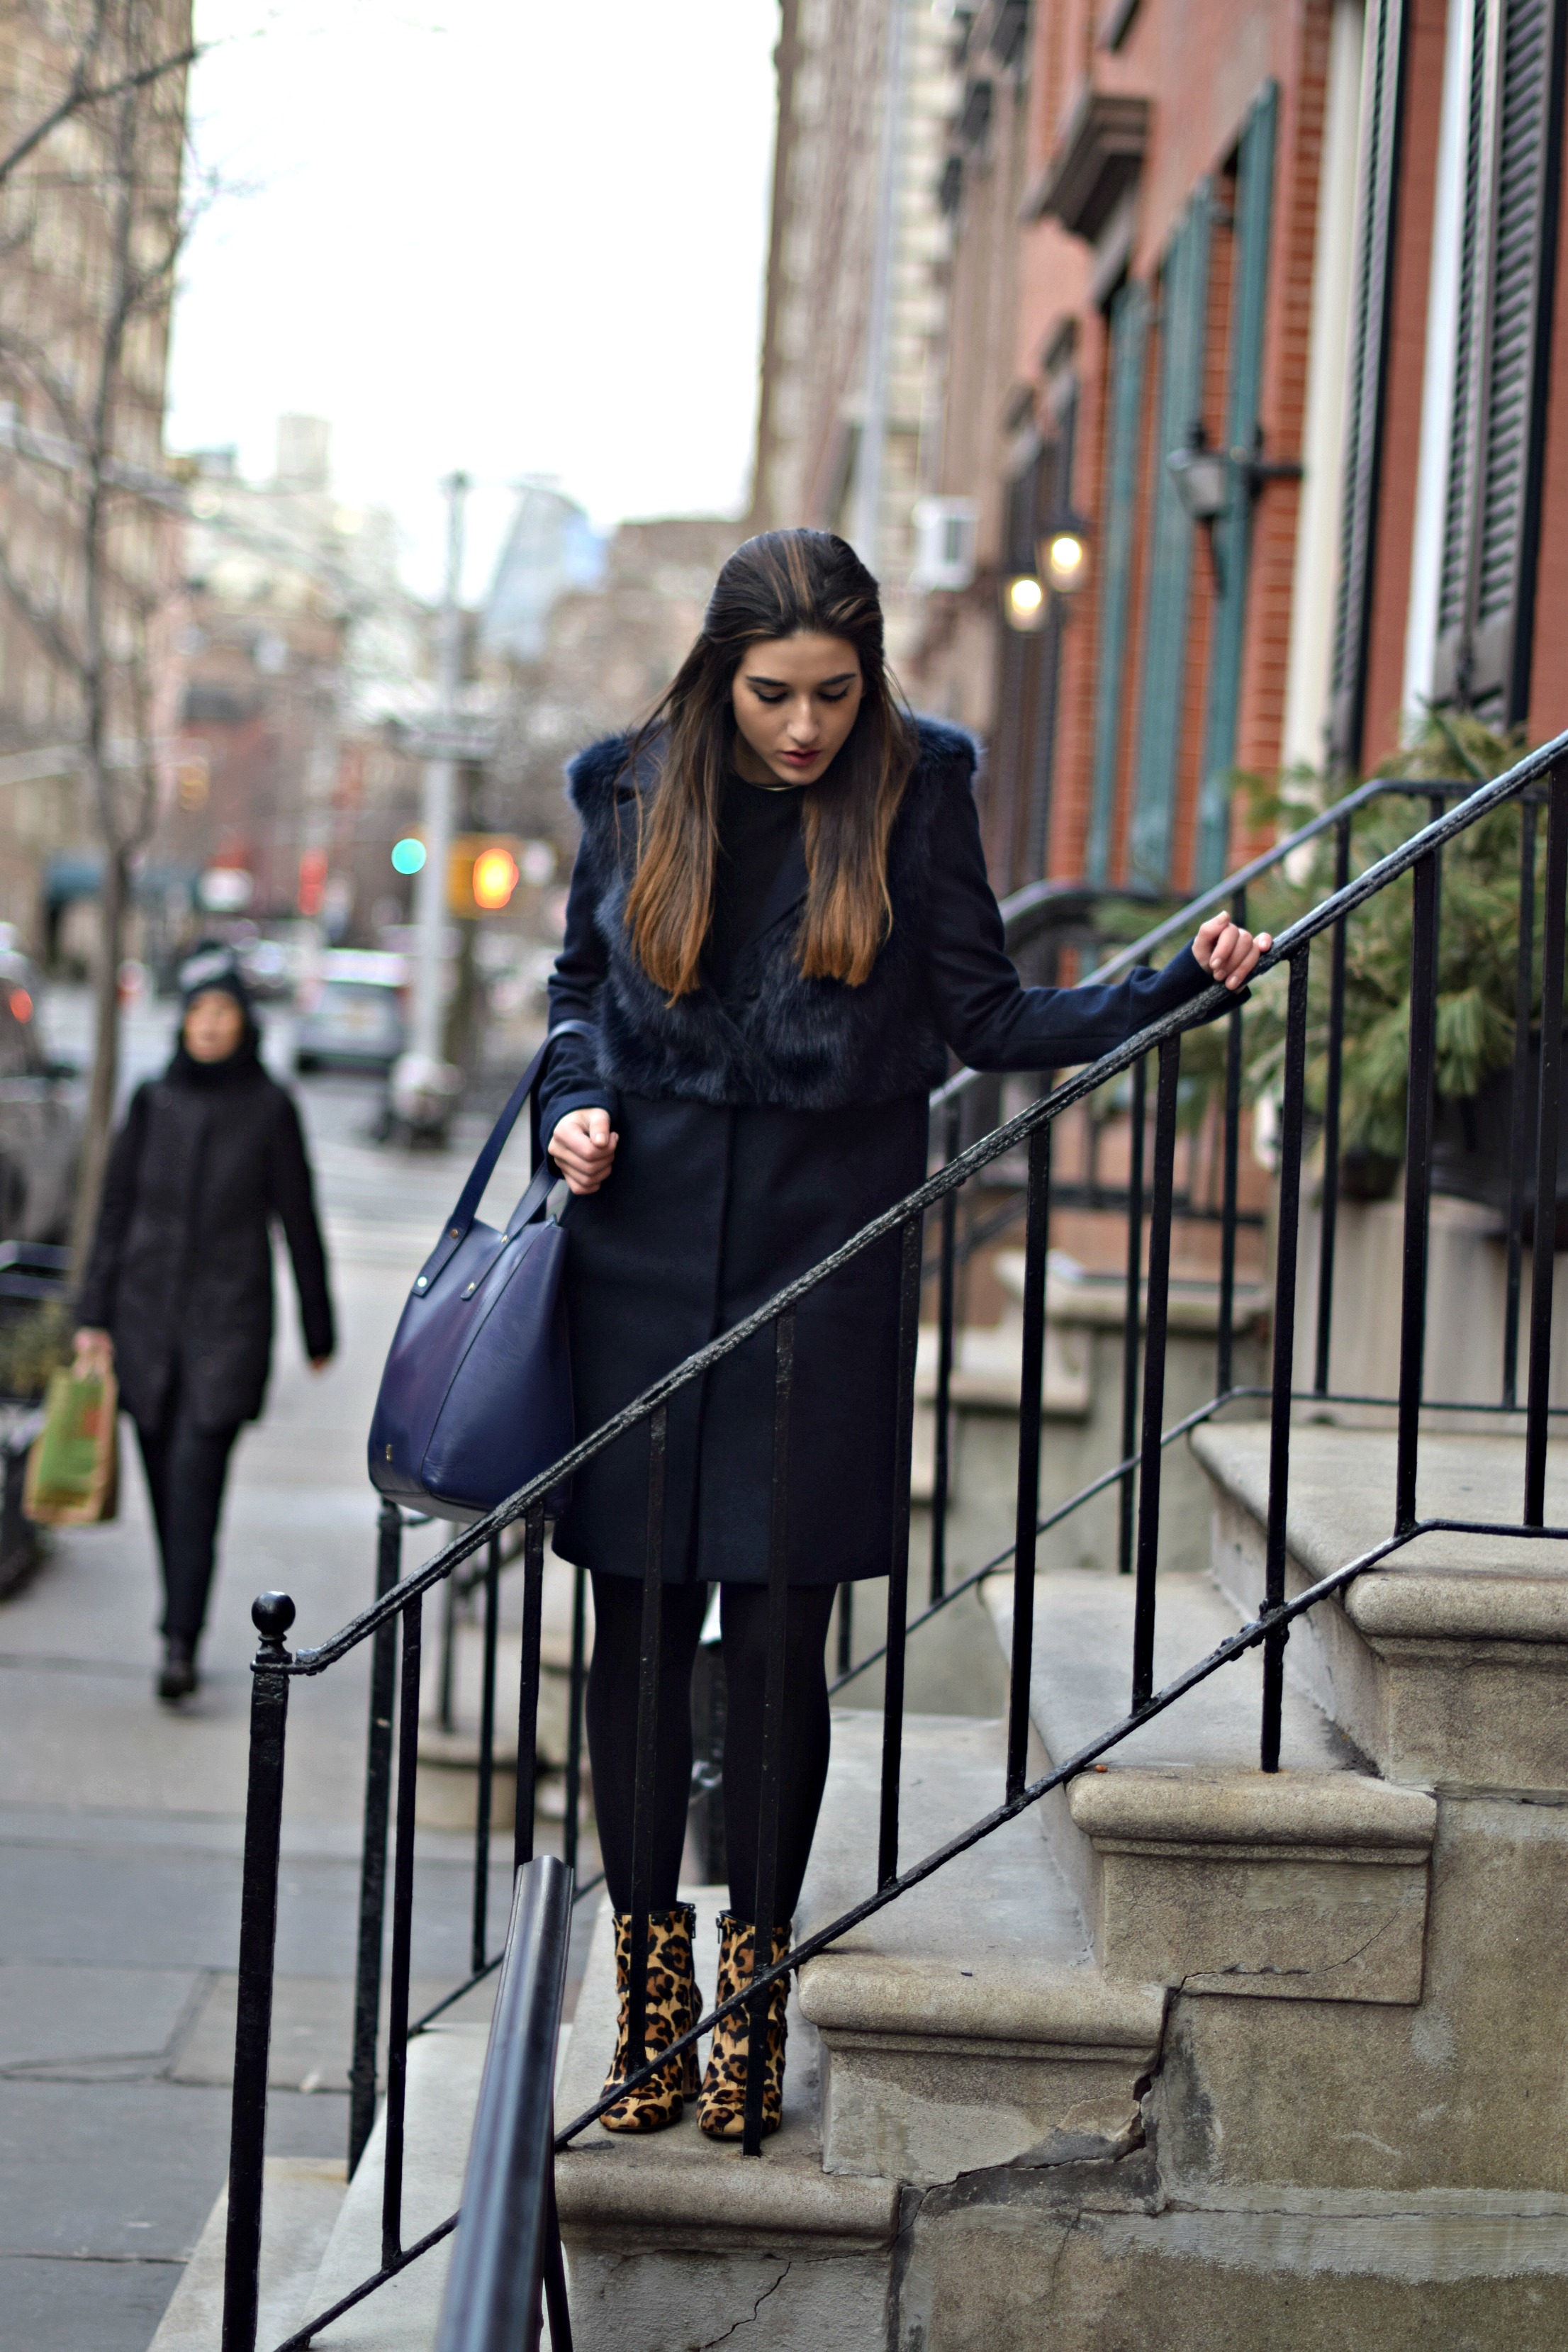 Navy Coat Coach Leopard Booties Louboutins & Love Fashion Blog Esther Santer NYC Street Style Blogger Outfit OOTD Fur Topshop Shopping Girl Women Swag Photoshoot Model Beautiful Winter Inspo NYFW Shoes Tights Ivanka Trump Soho Tote Hair City Lifestyle.jpg